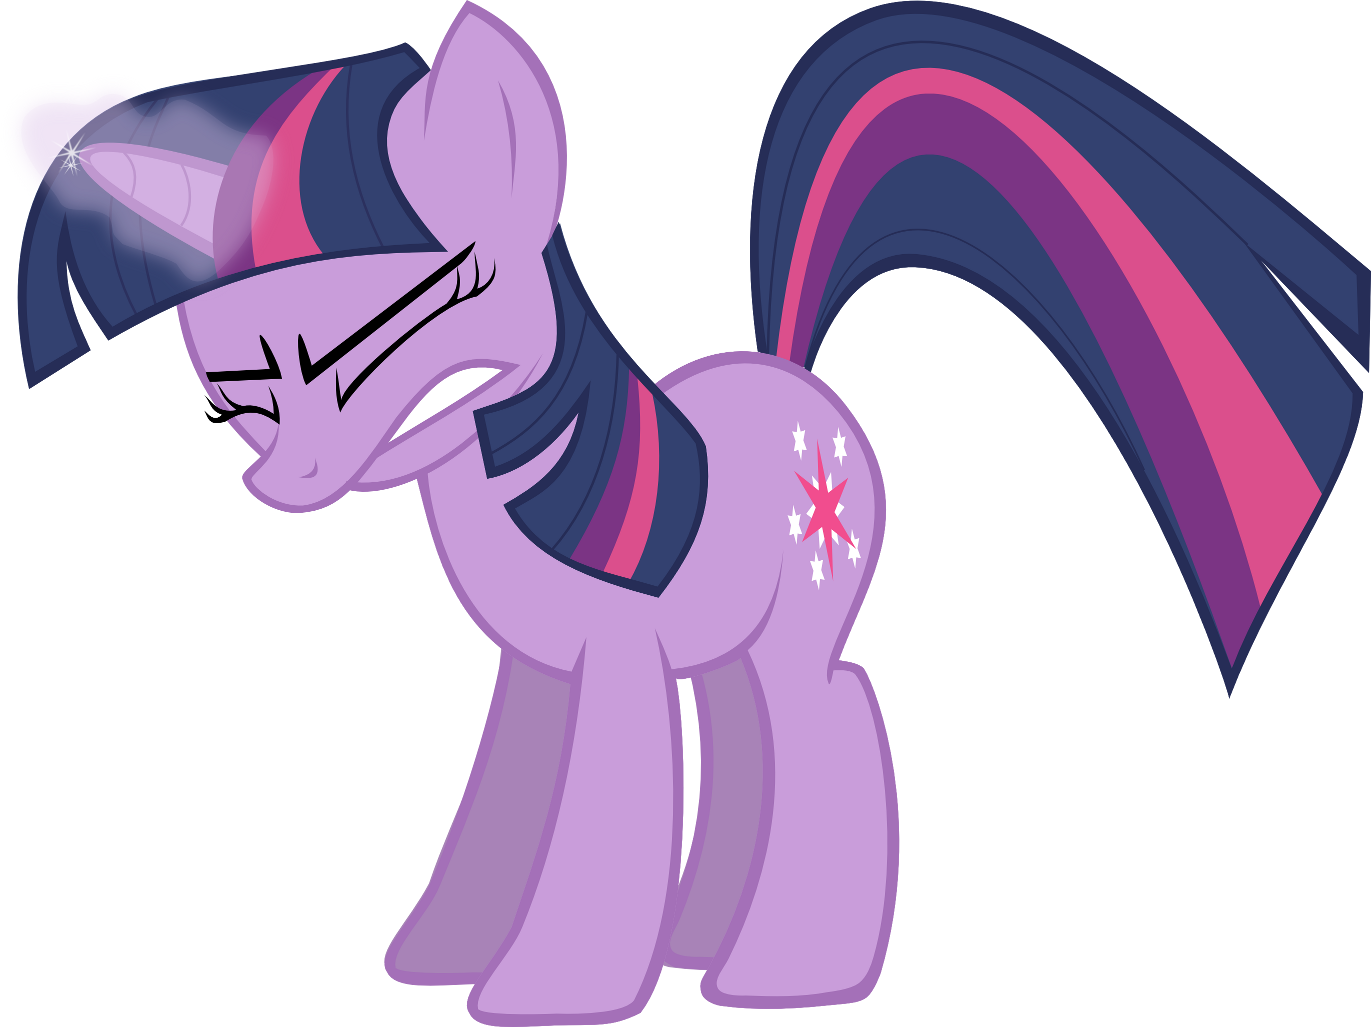 twilight_sparkle_frustrated_by_areyesram